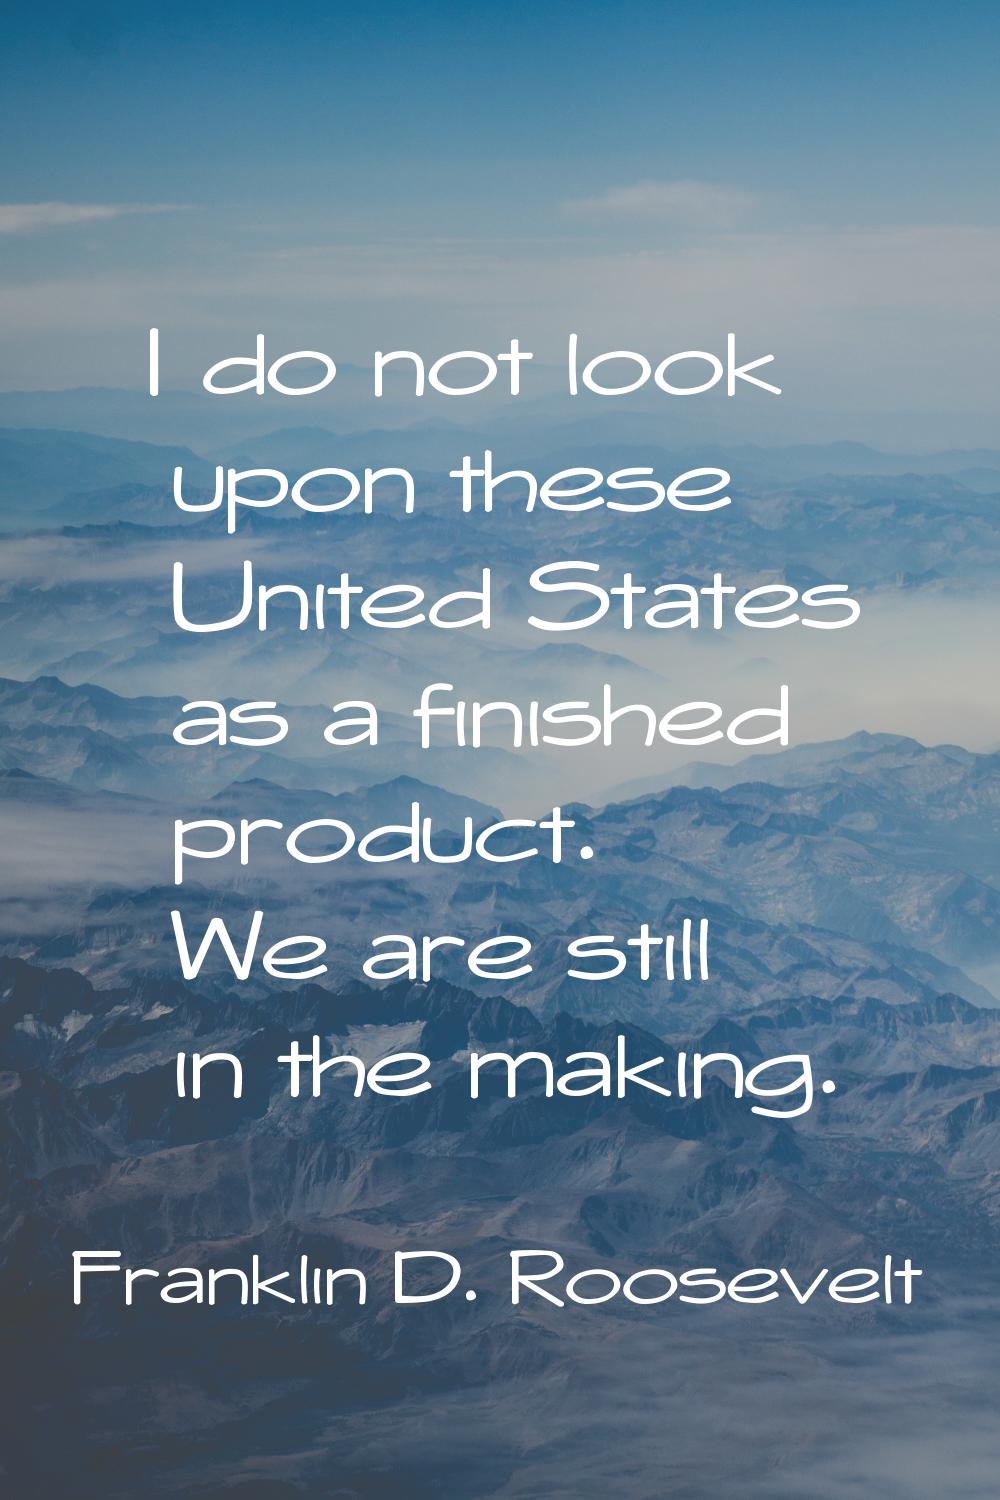 I do not look upon these United States as a finished product. We are still in the making.